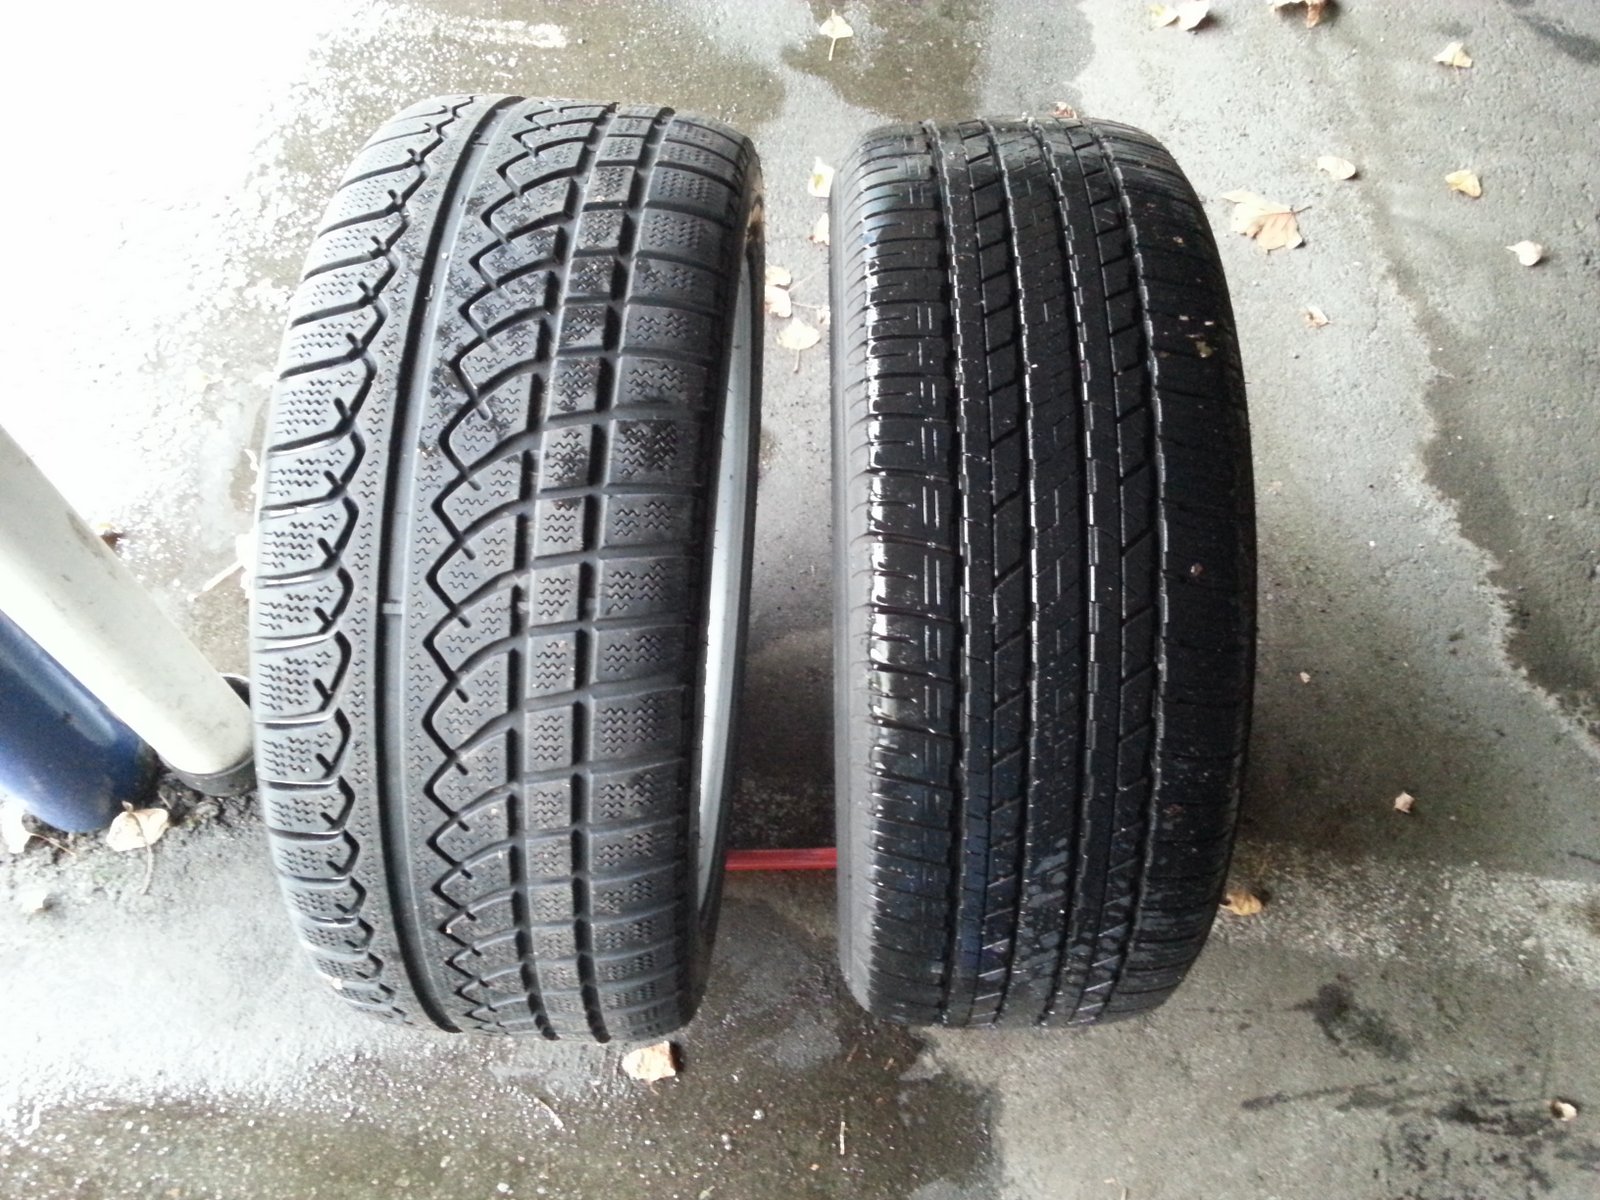 difference between the 245/45R18 on the left and the original 235/45R18 on the right.